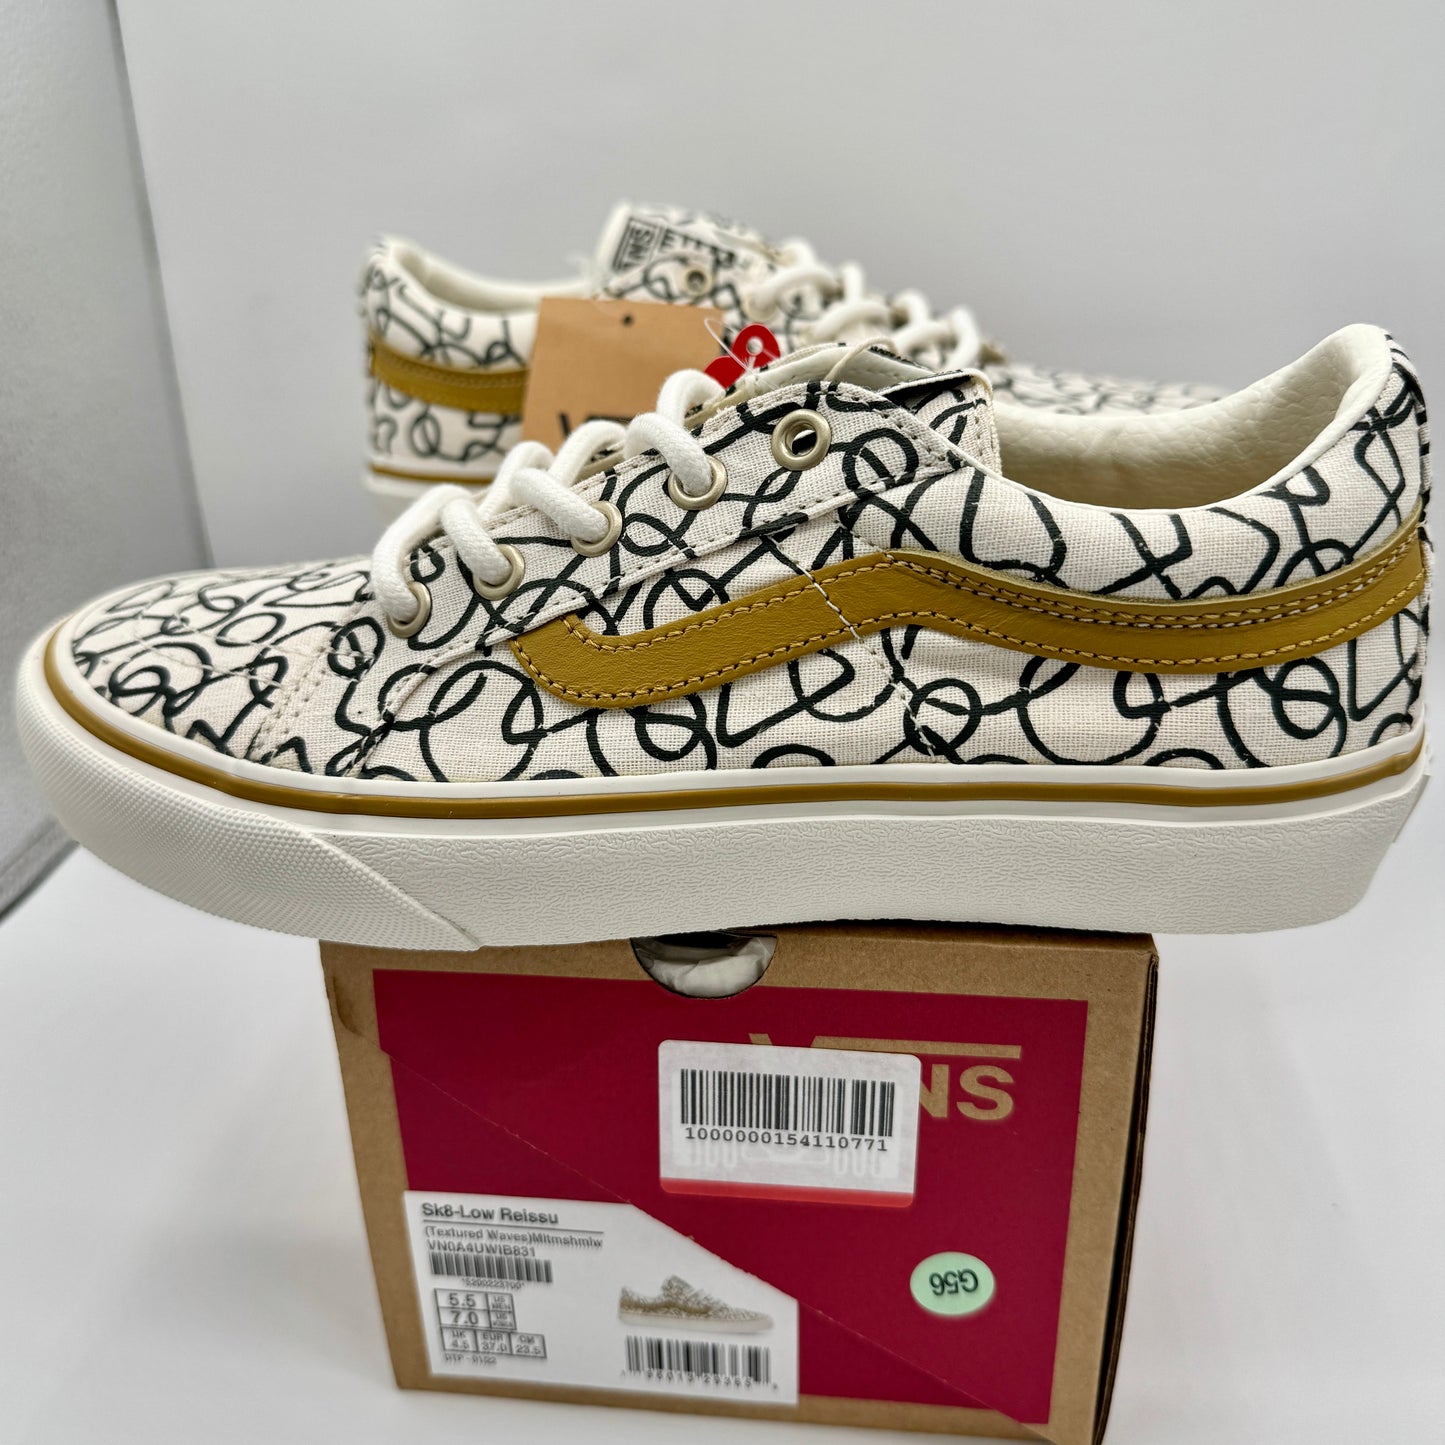 Vans Sk8 Low Reissue Sneakers Textured Waves / Marshmallow Shoes Skate